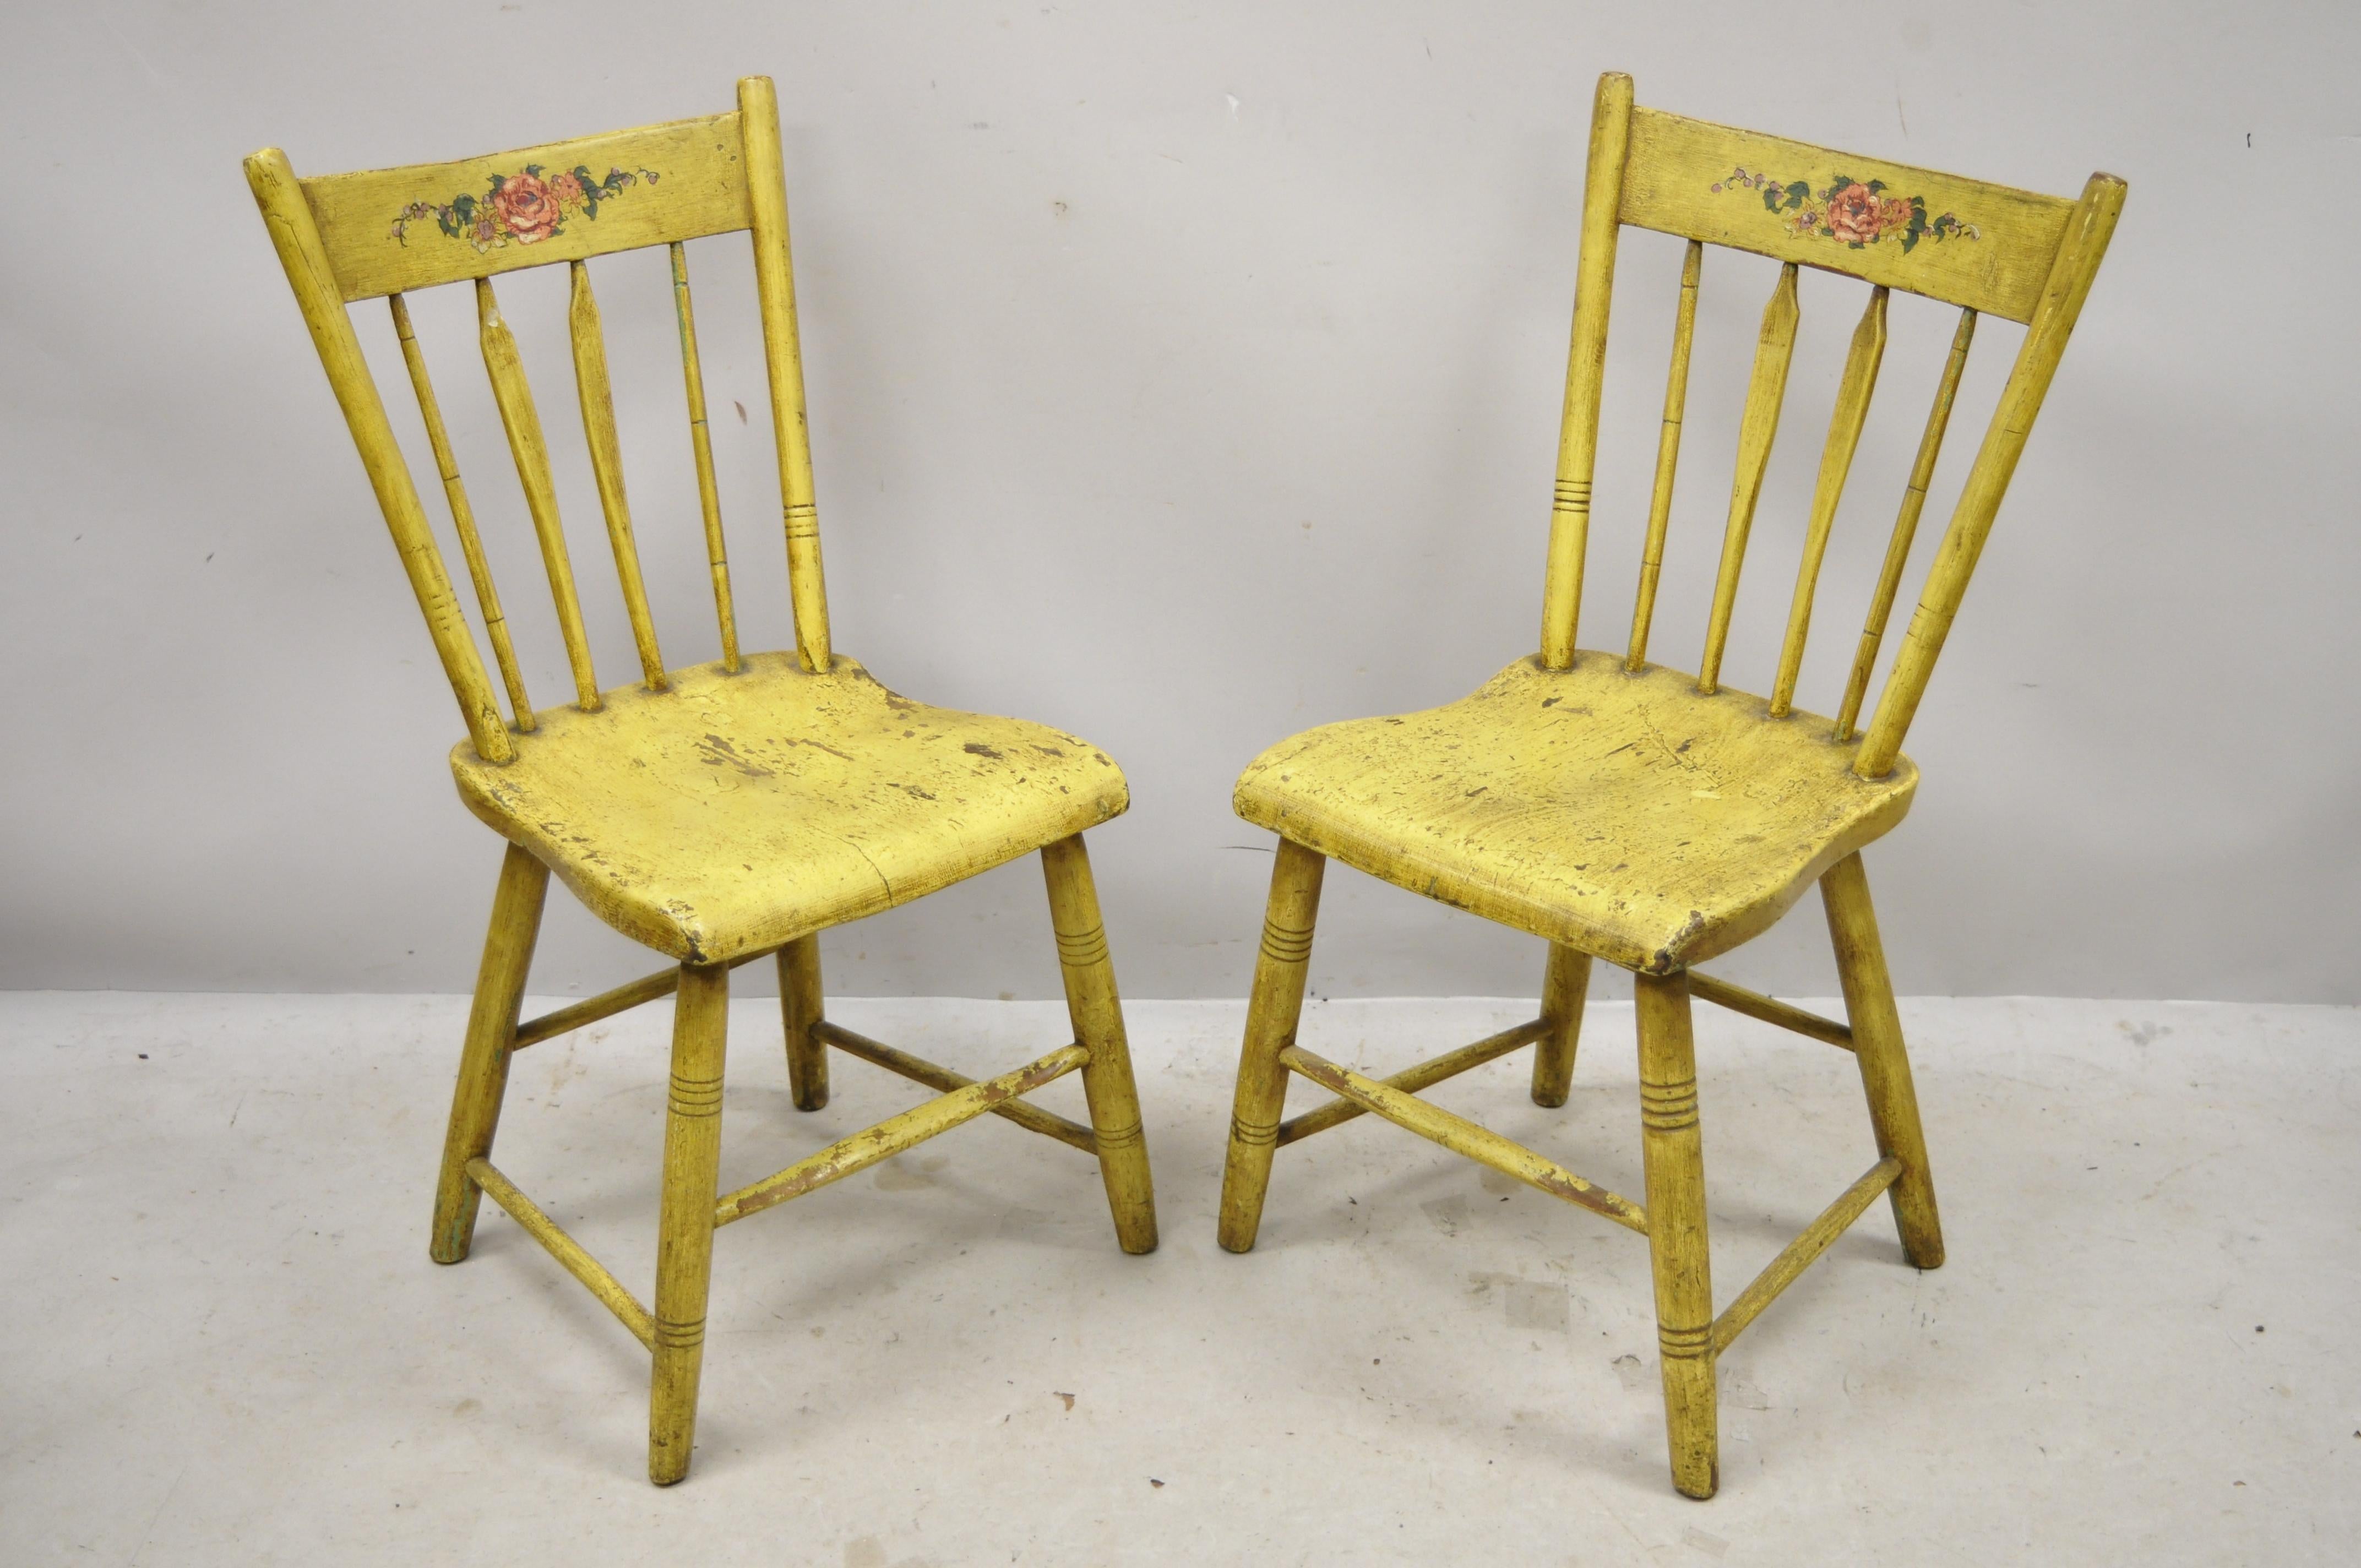 Antique Frederick Loeser & Co Yellow American Primitive Hitchcock style painted side chairs - a pair (A). Item features floral painted backrest, spindle back, carved stretcher base, remarkable patina, solid wood frames, yellow distressed finish,